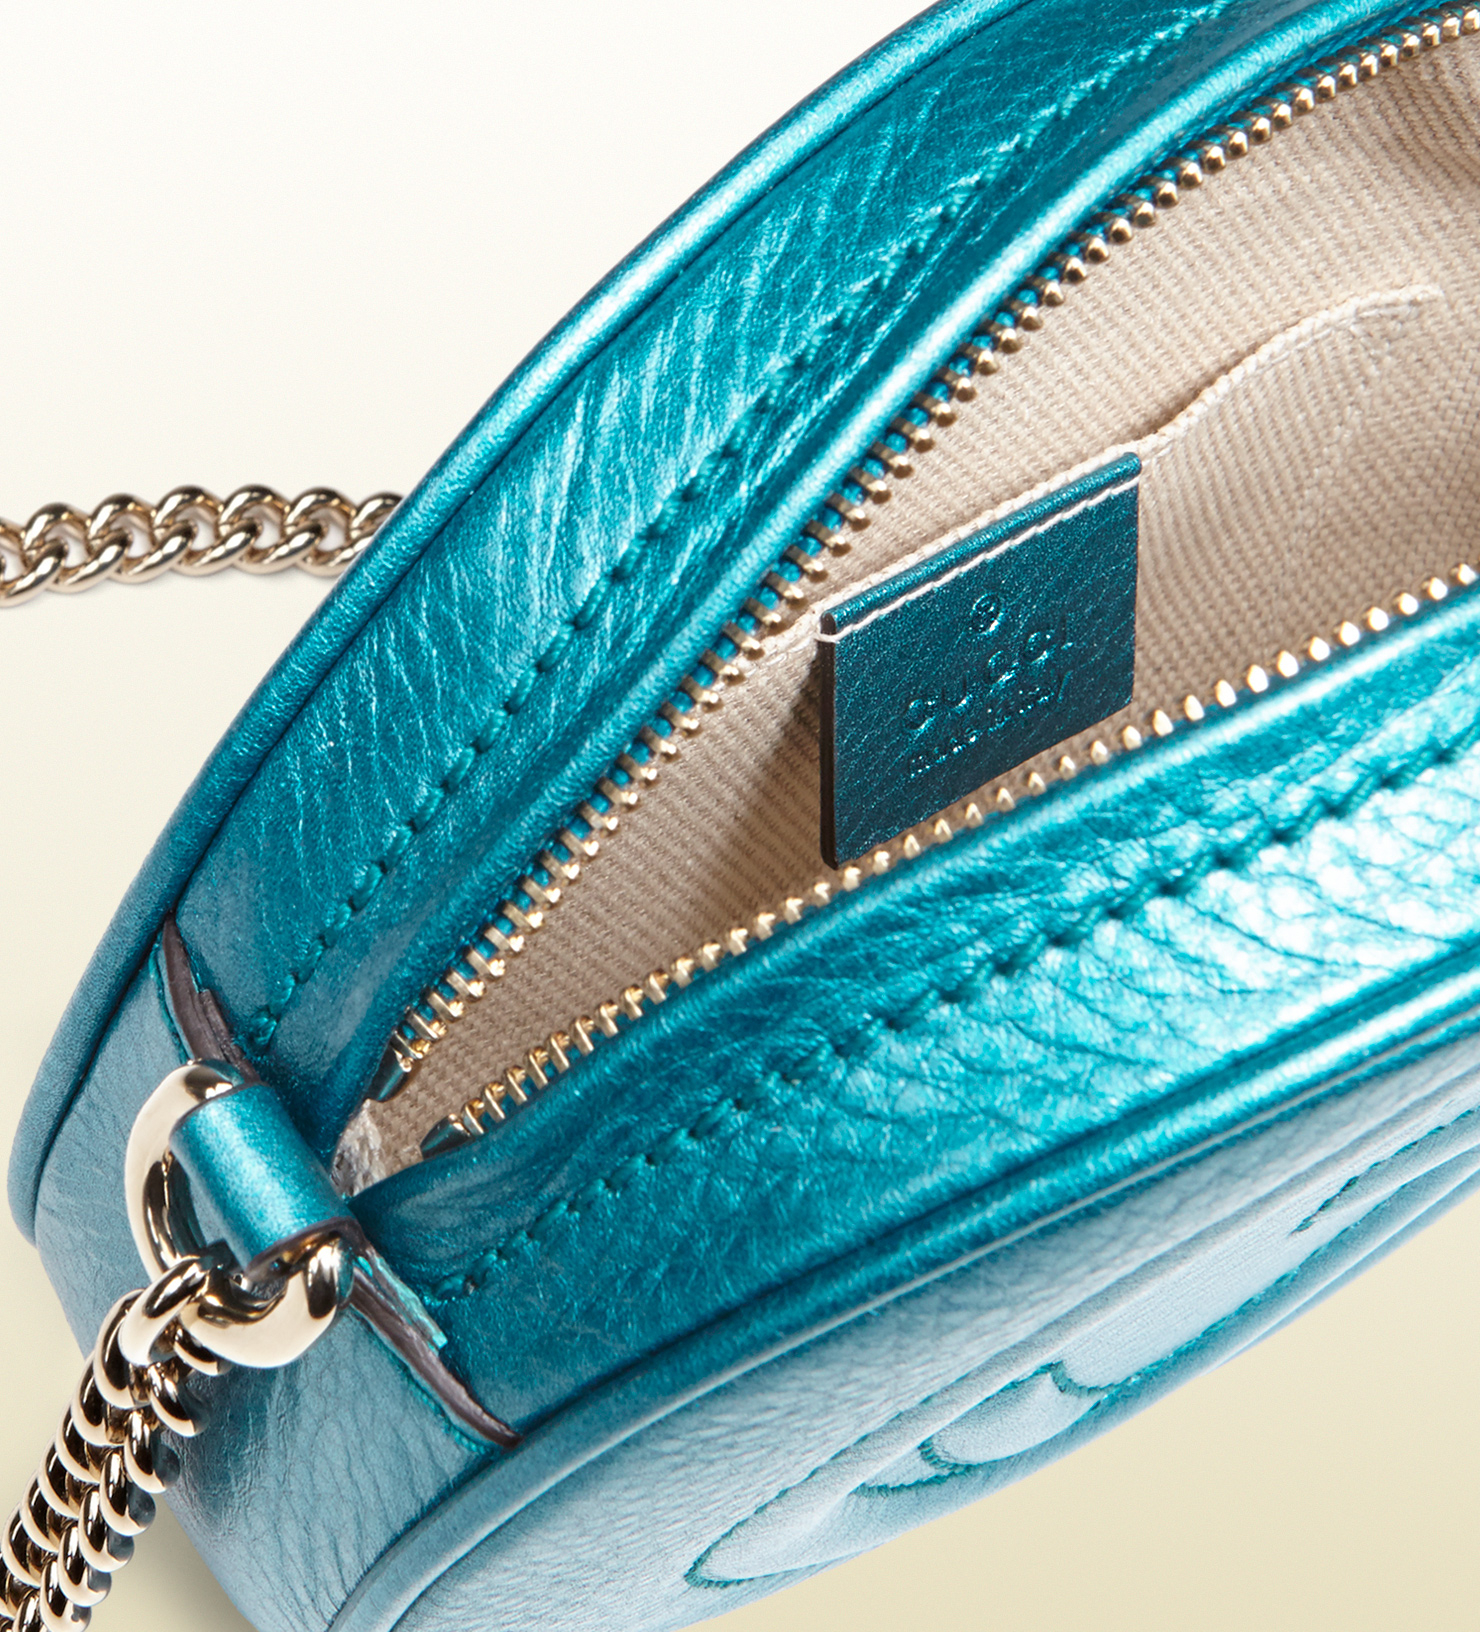 Gucci Online Exclusive Soho Leather Mini Chain Bag in Teal (Blue) - Lyst